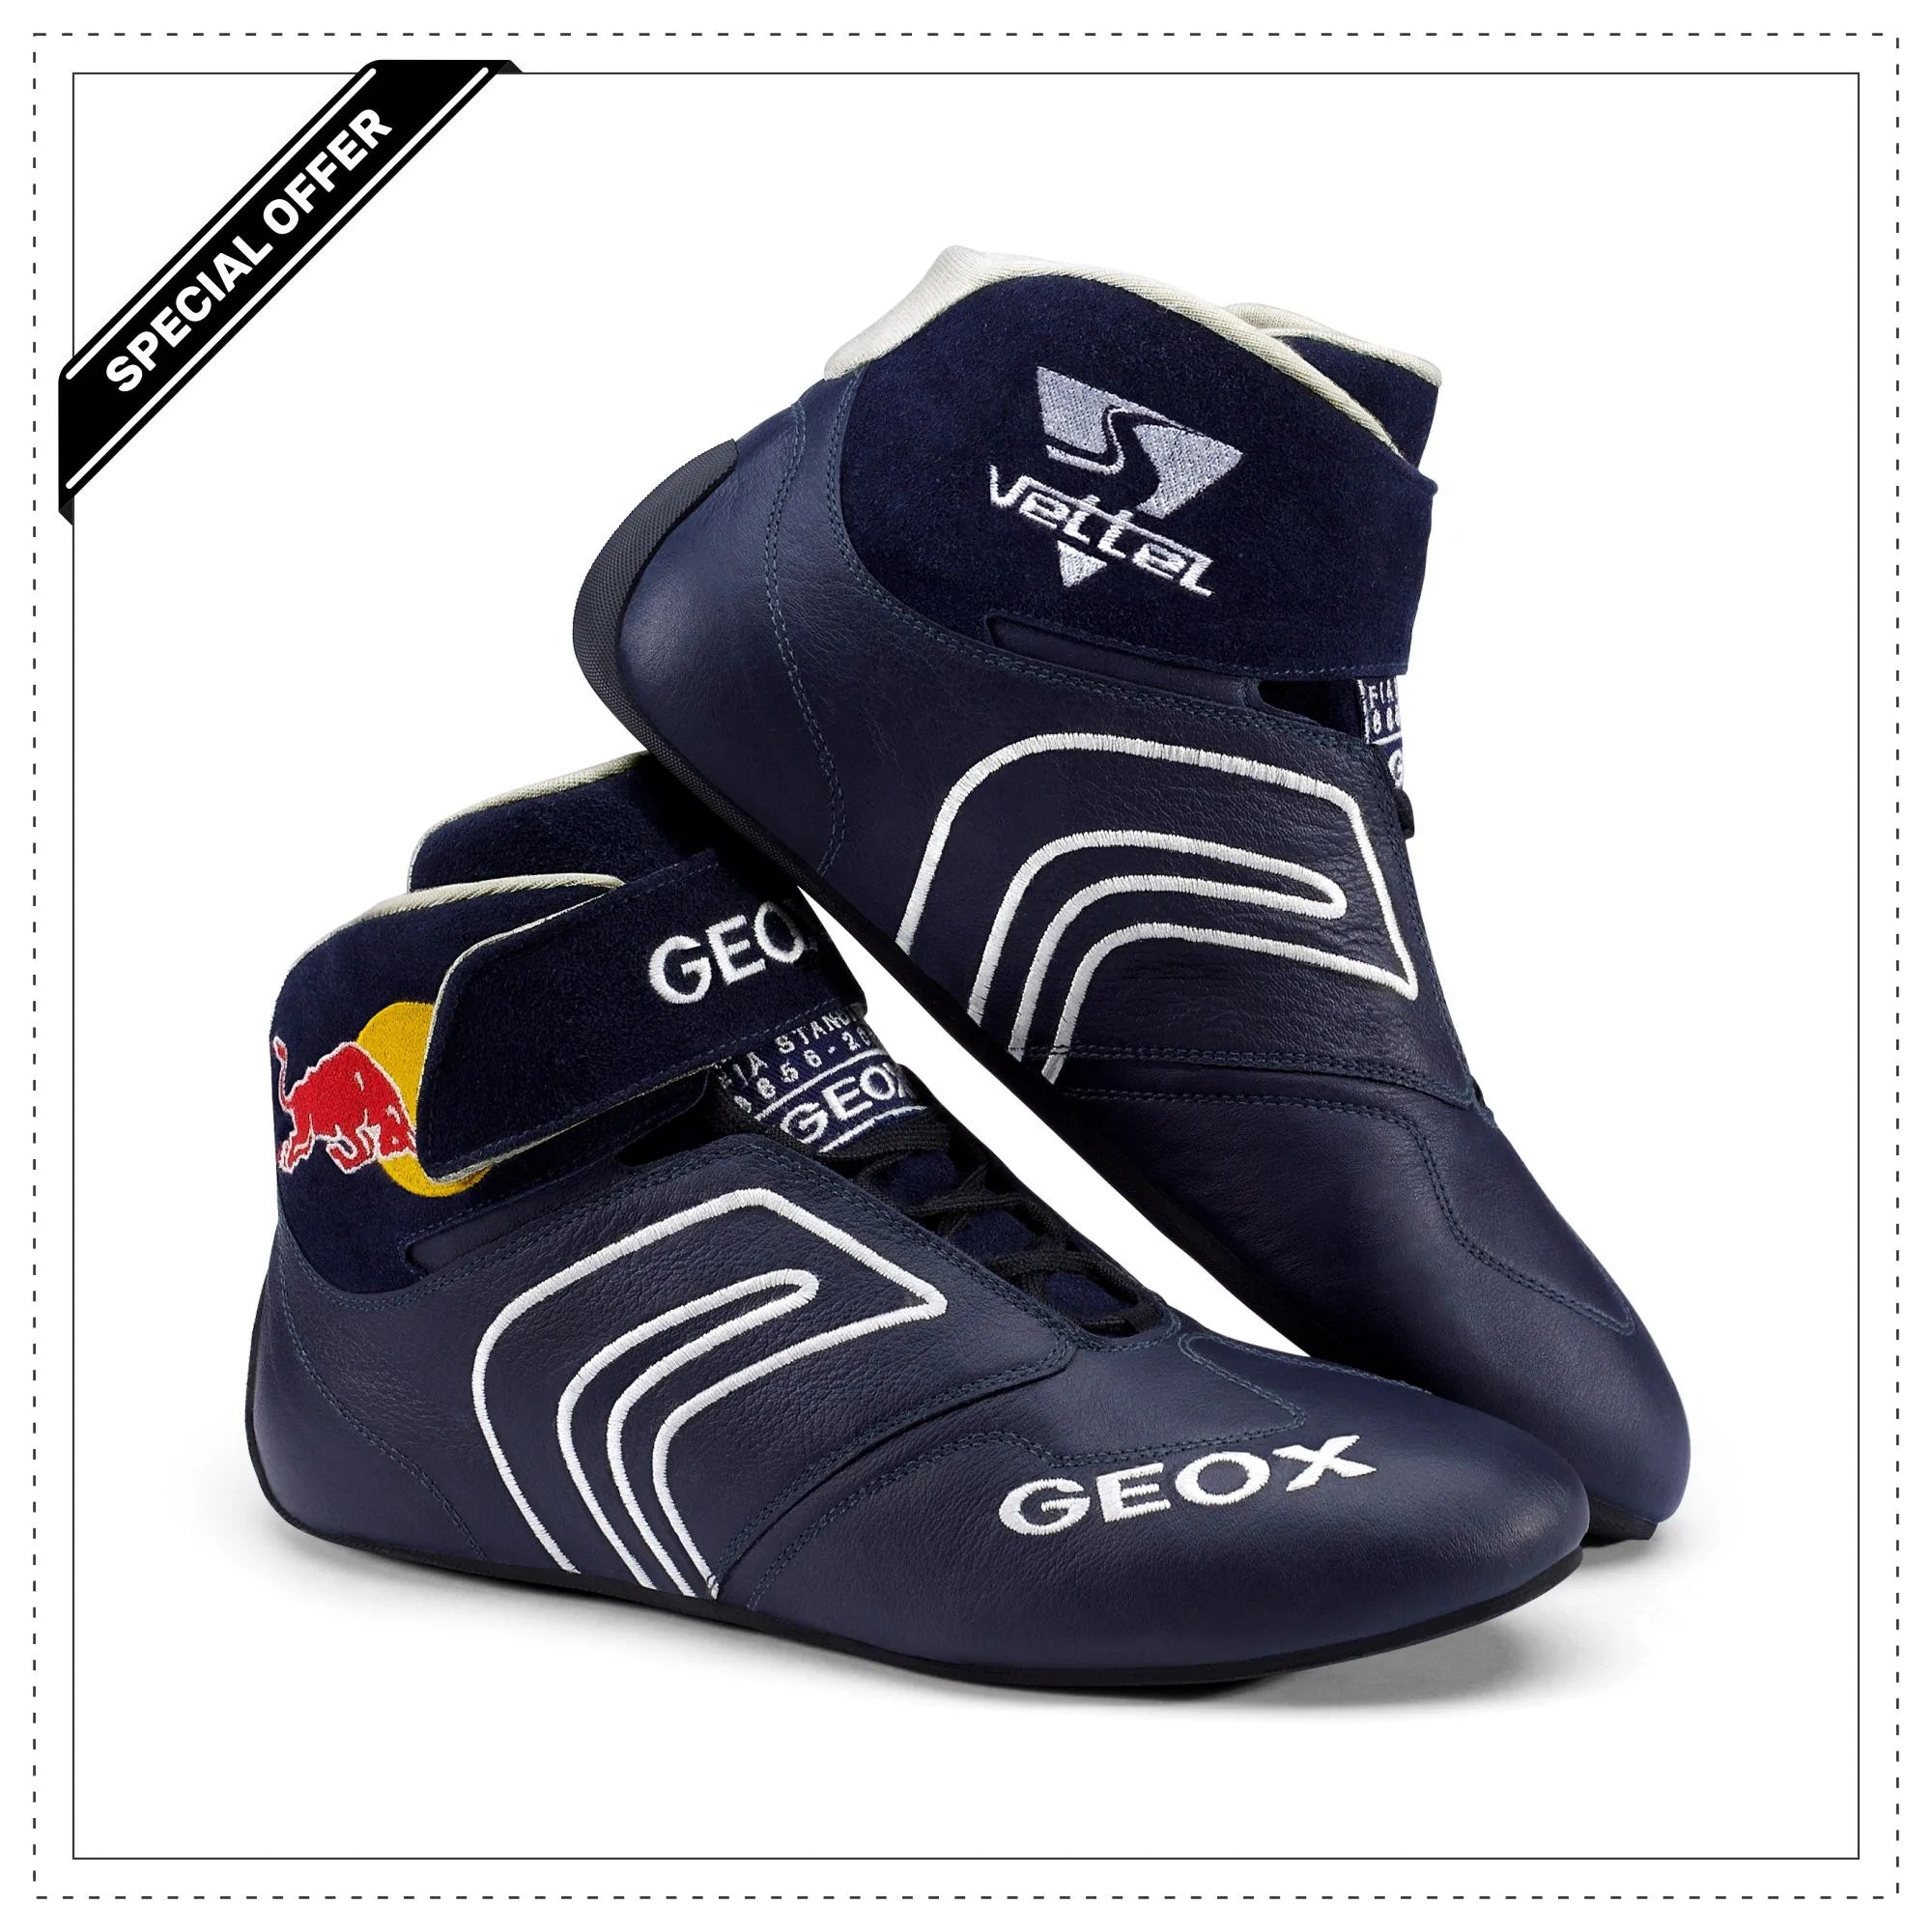 Redbull Geox Race Shoes –